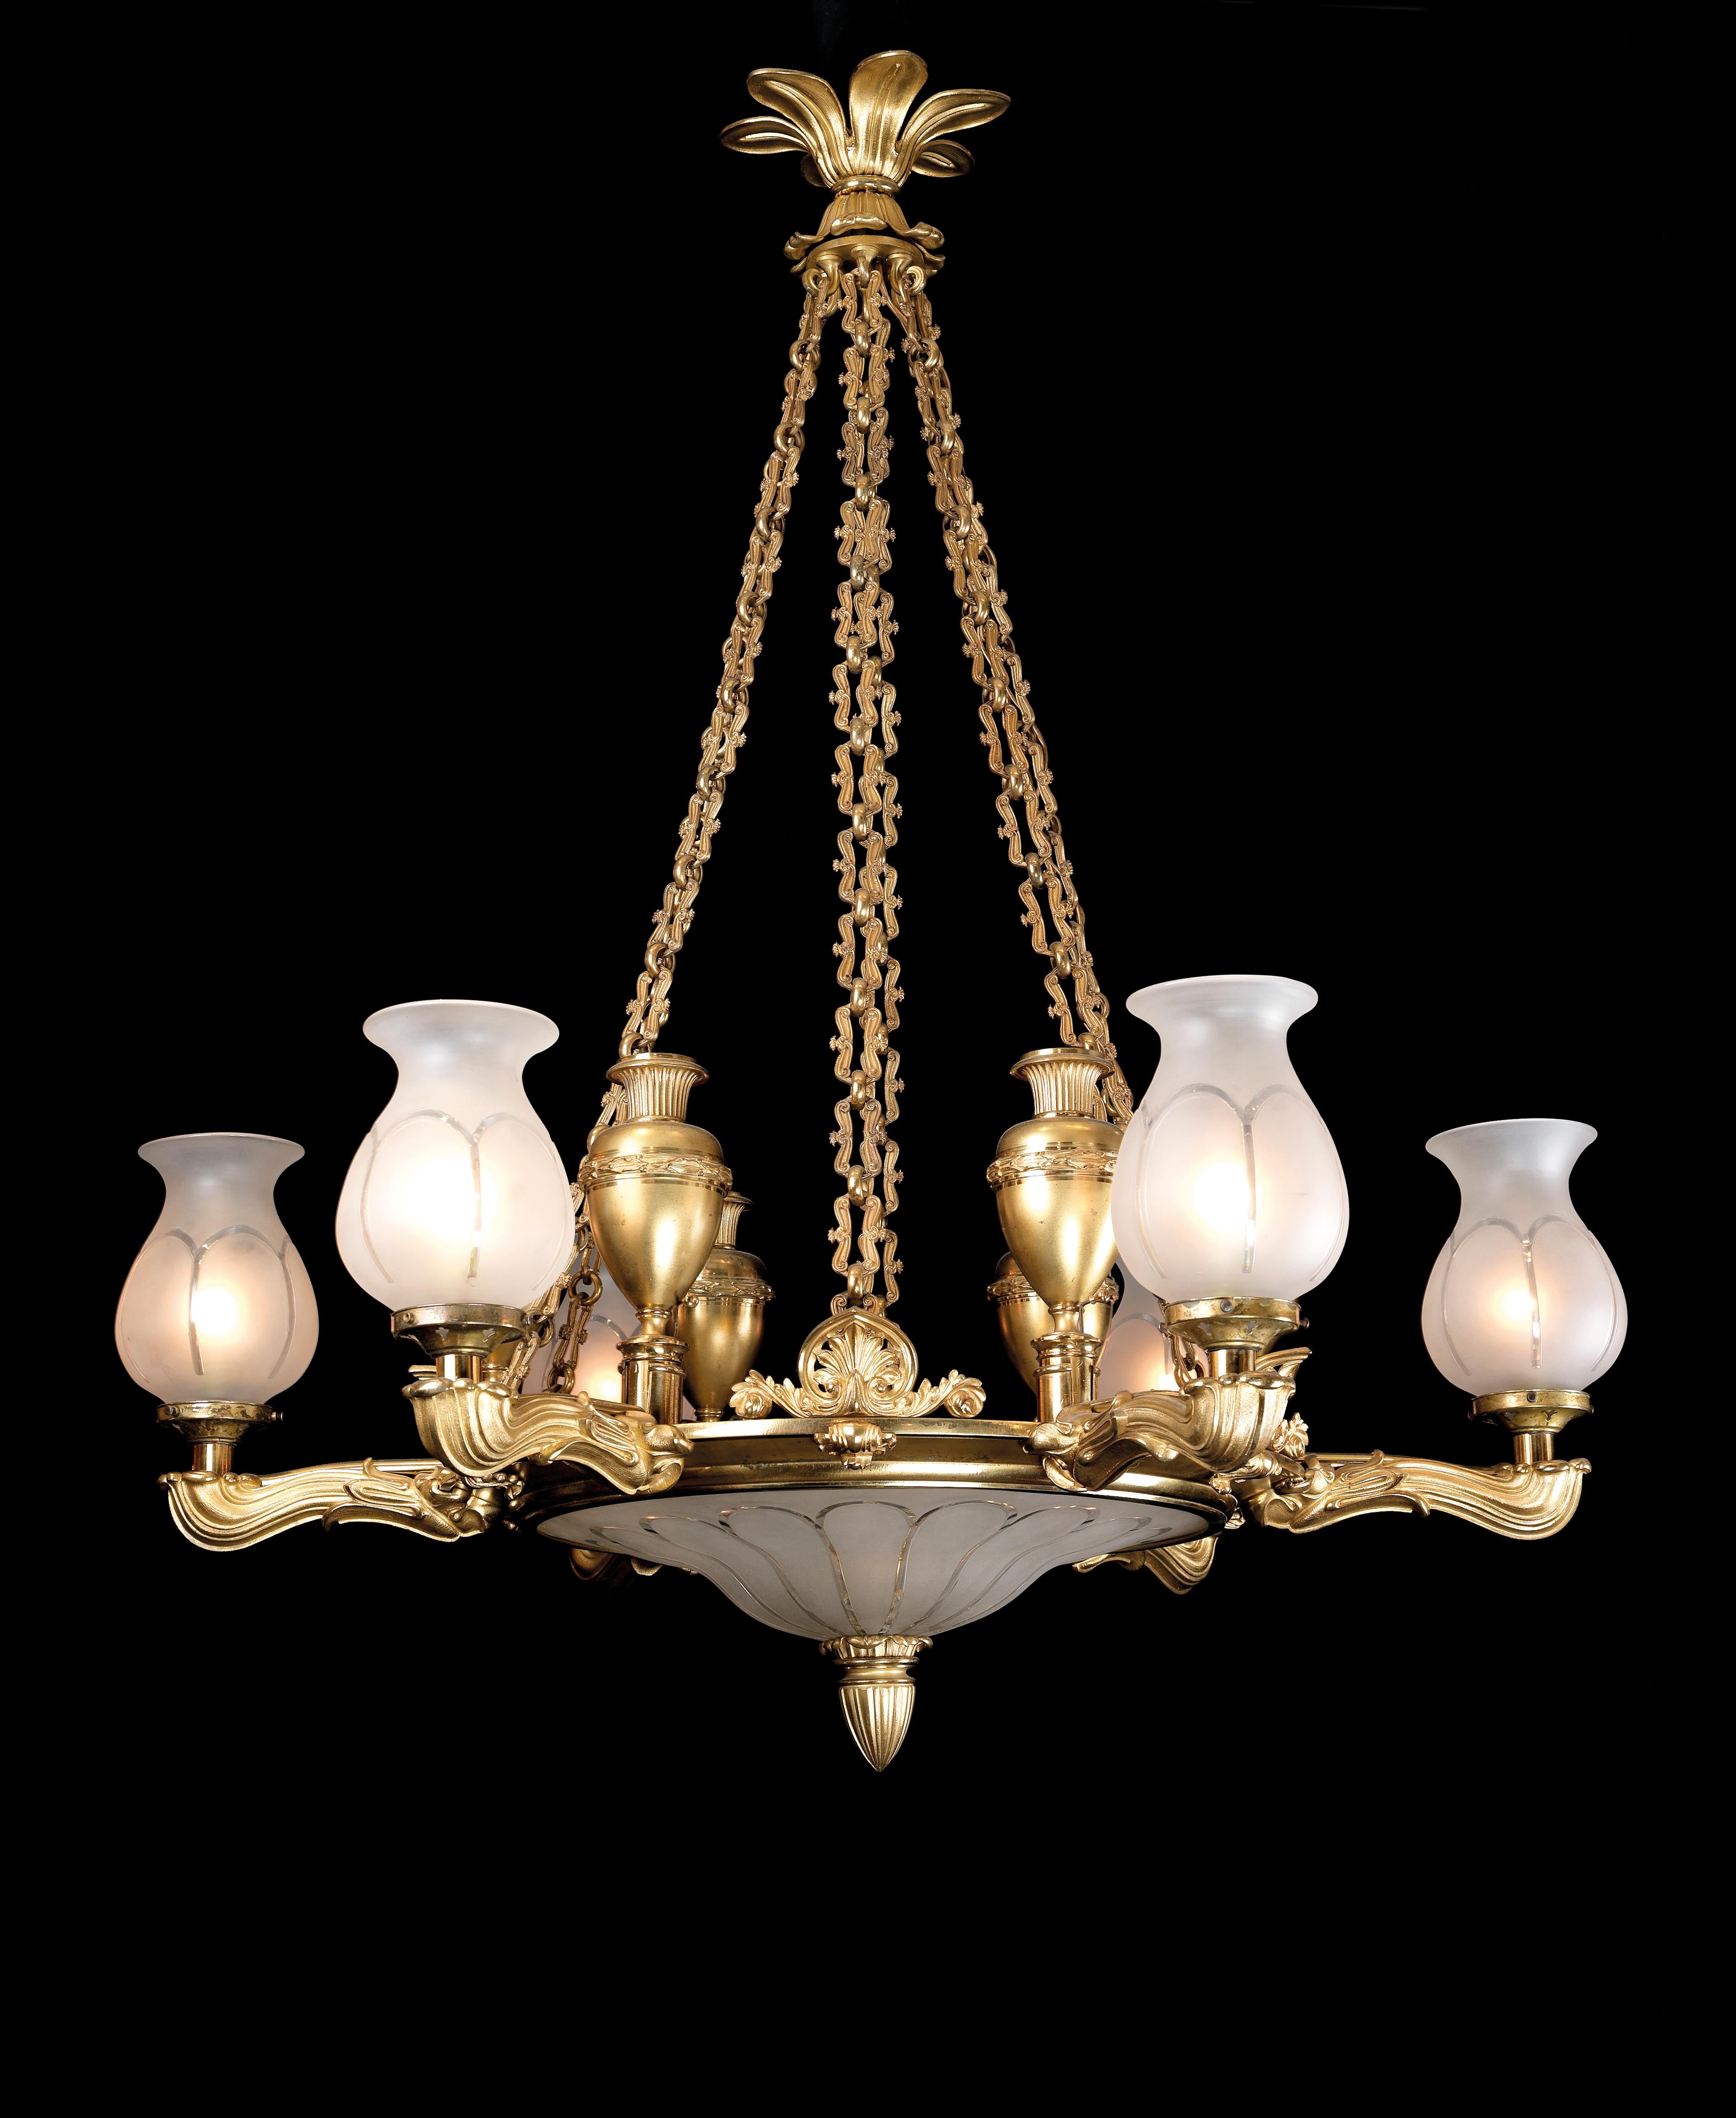 A Regency six-light gilt-bronze chandelier by Hancock & Co.

English, circa 1830. 

A Regency six-light gilt-bronze chandelier by Hancock & Co with a lotus leaf ceiling corona supporting a frosted and cut glass dish on six chains, the lotus cast